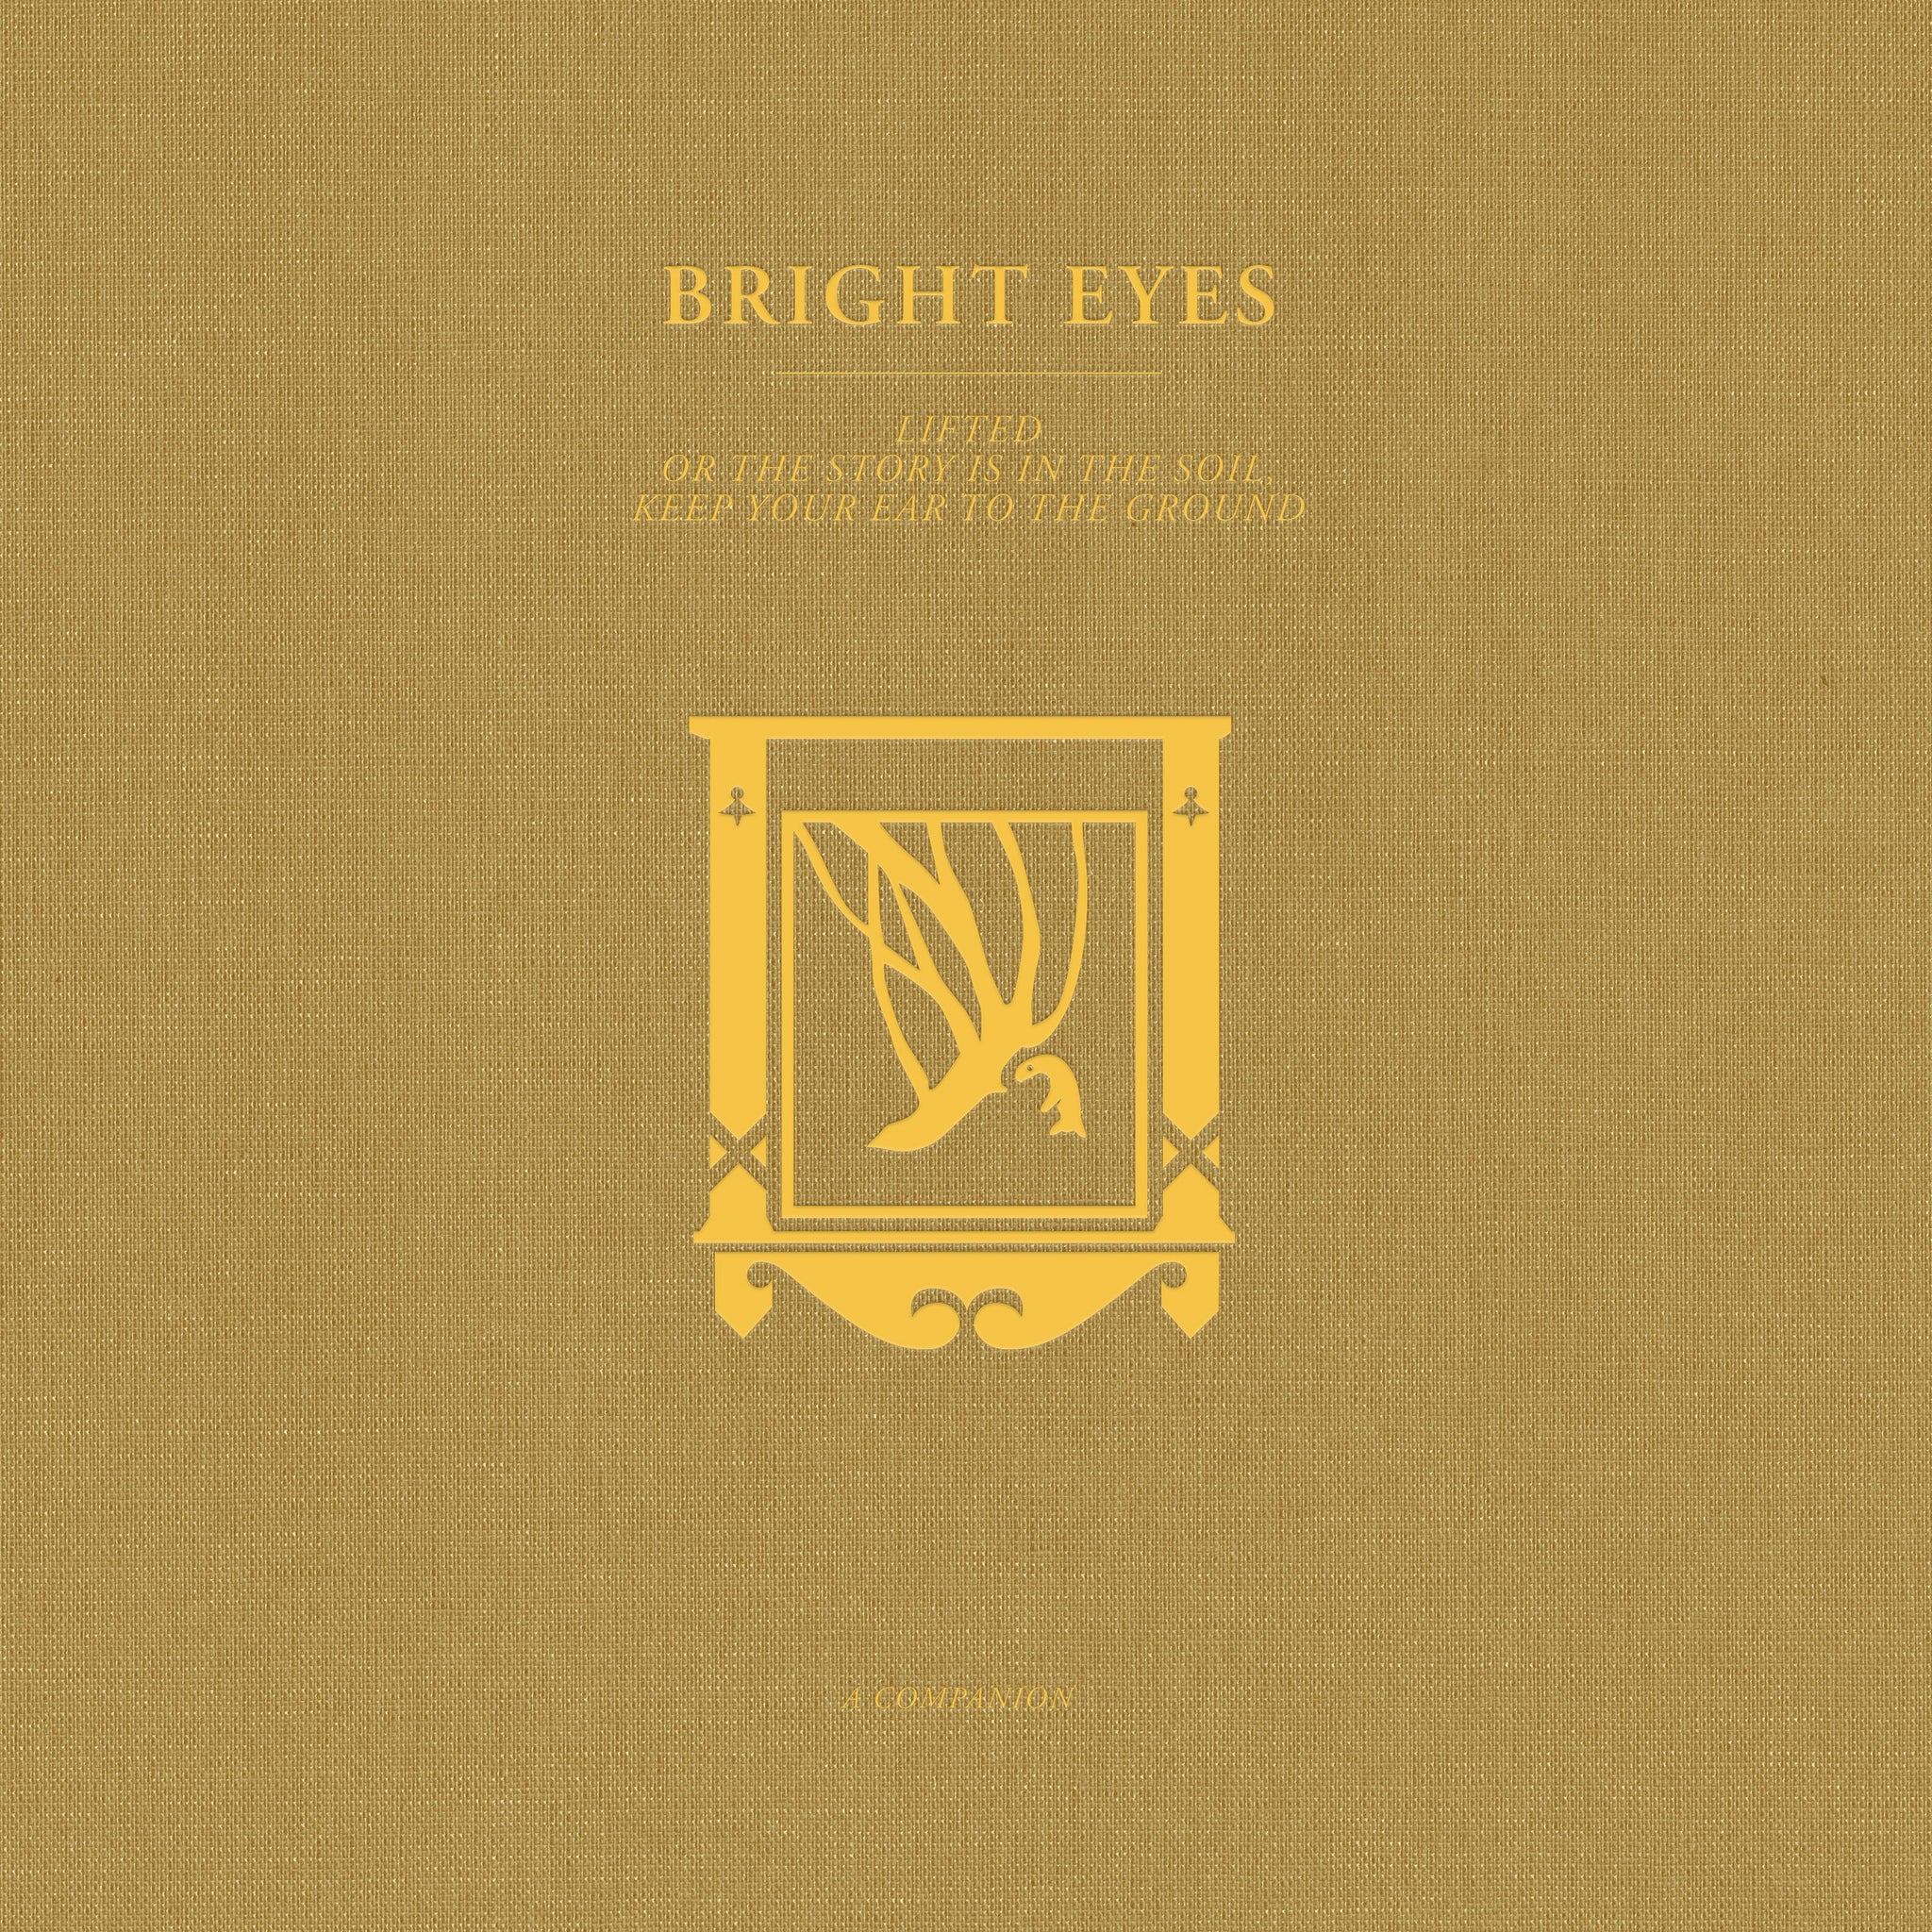 BRIGHT EYES - LIFTED OR THE STORY IS IN THE SOIL, KEEP YOUR EAR TO THE GROUND: A COMPANION Vinyl LP